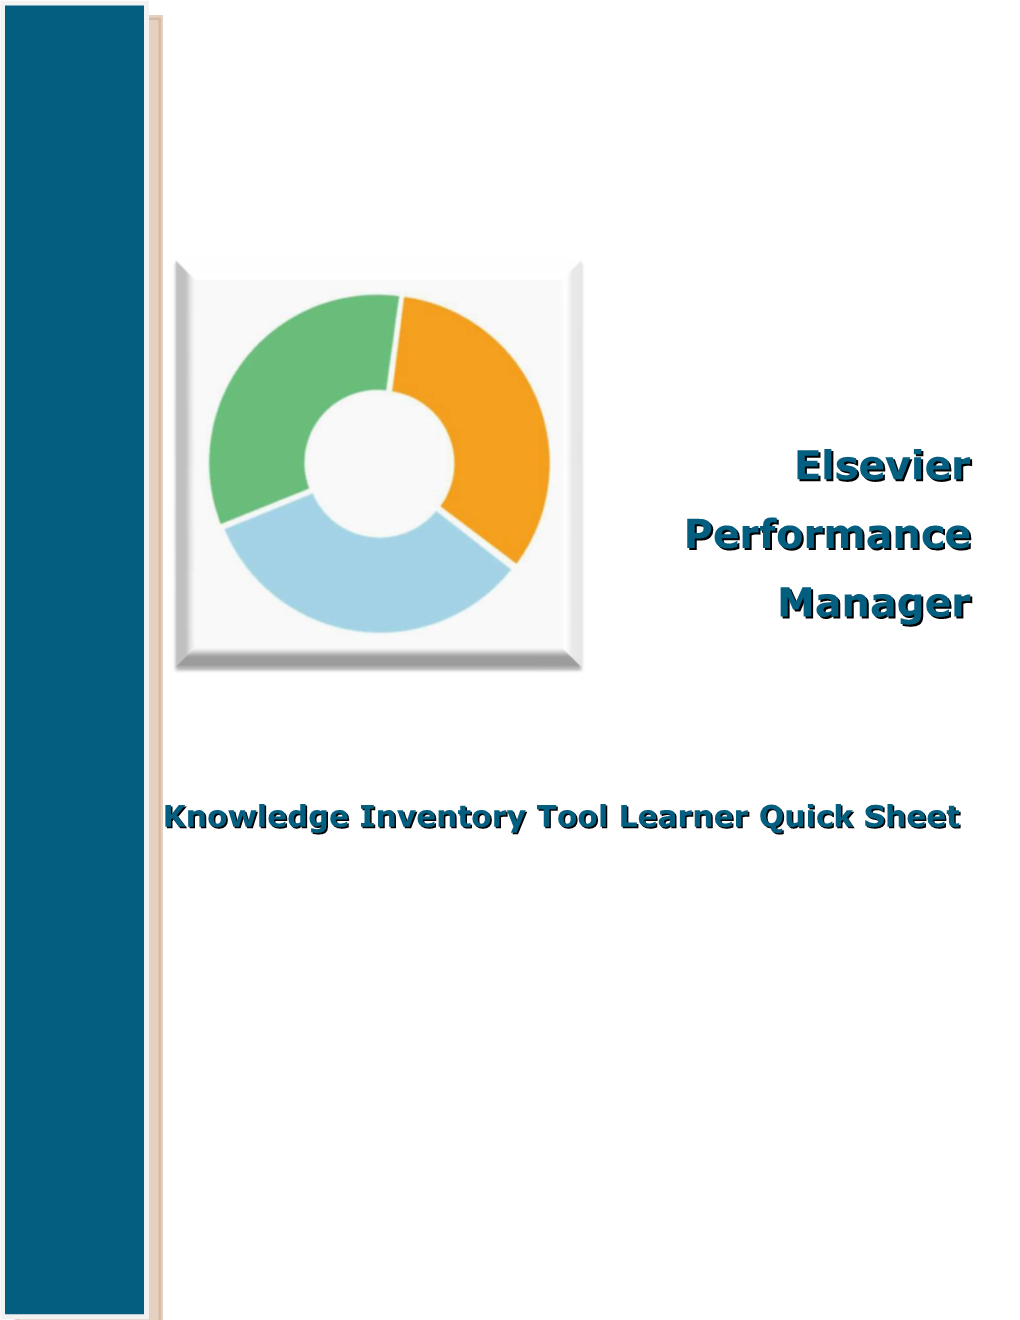 Knowledge Inventory Tool Learner Quick Sheet